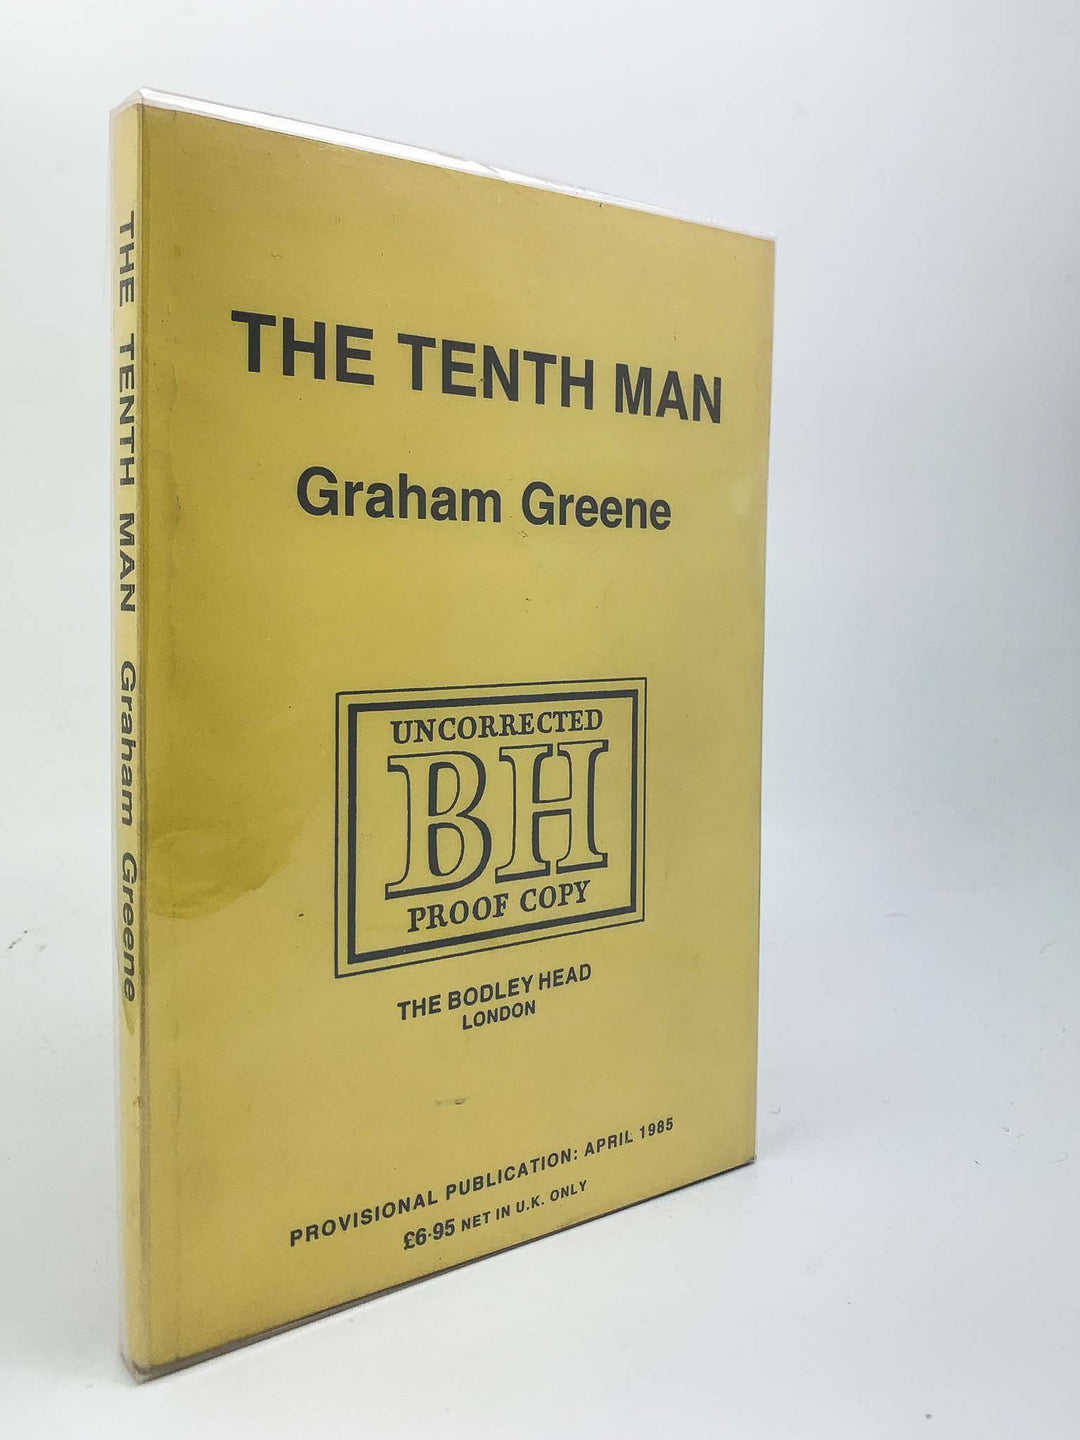 Greene, Graham - The Tenth Man | front cover